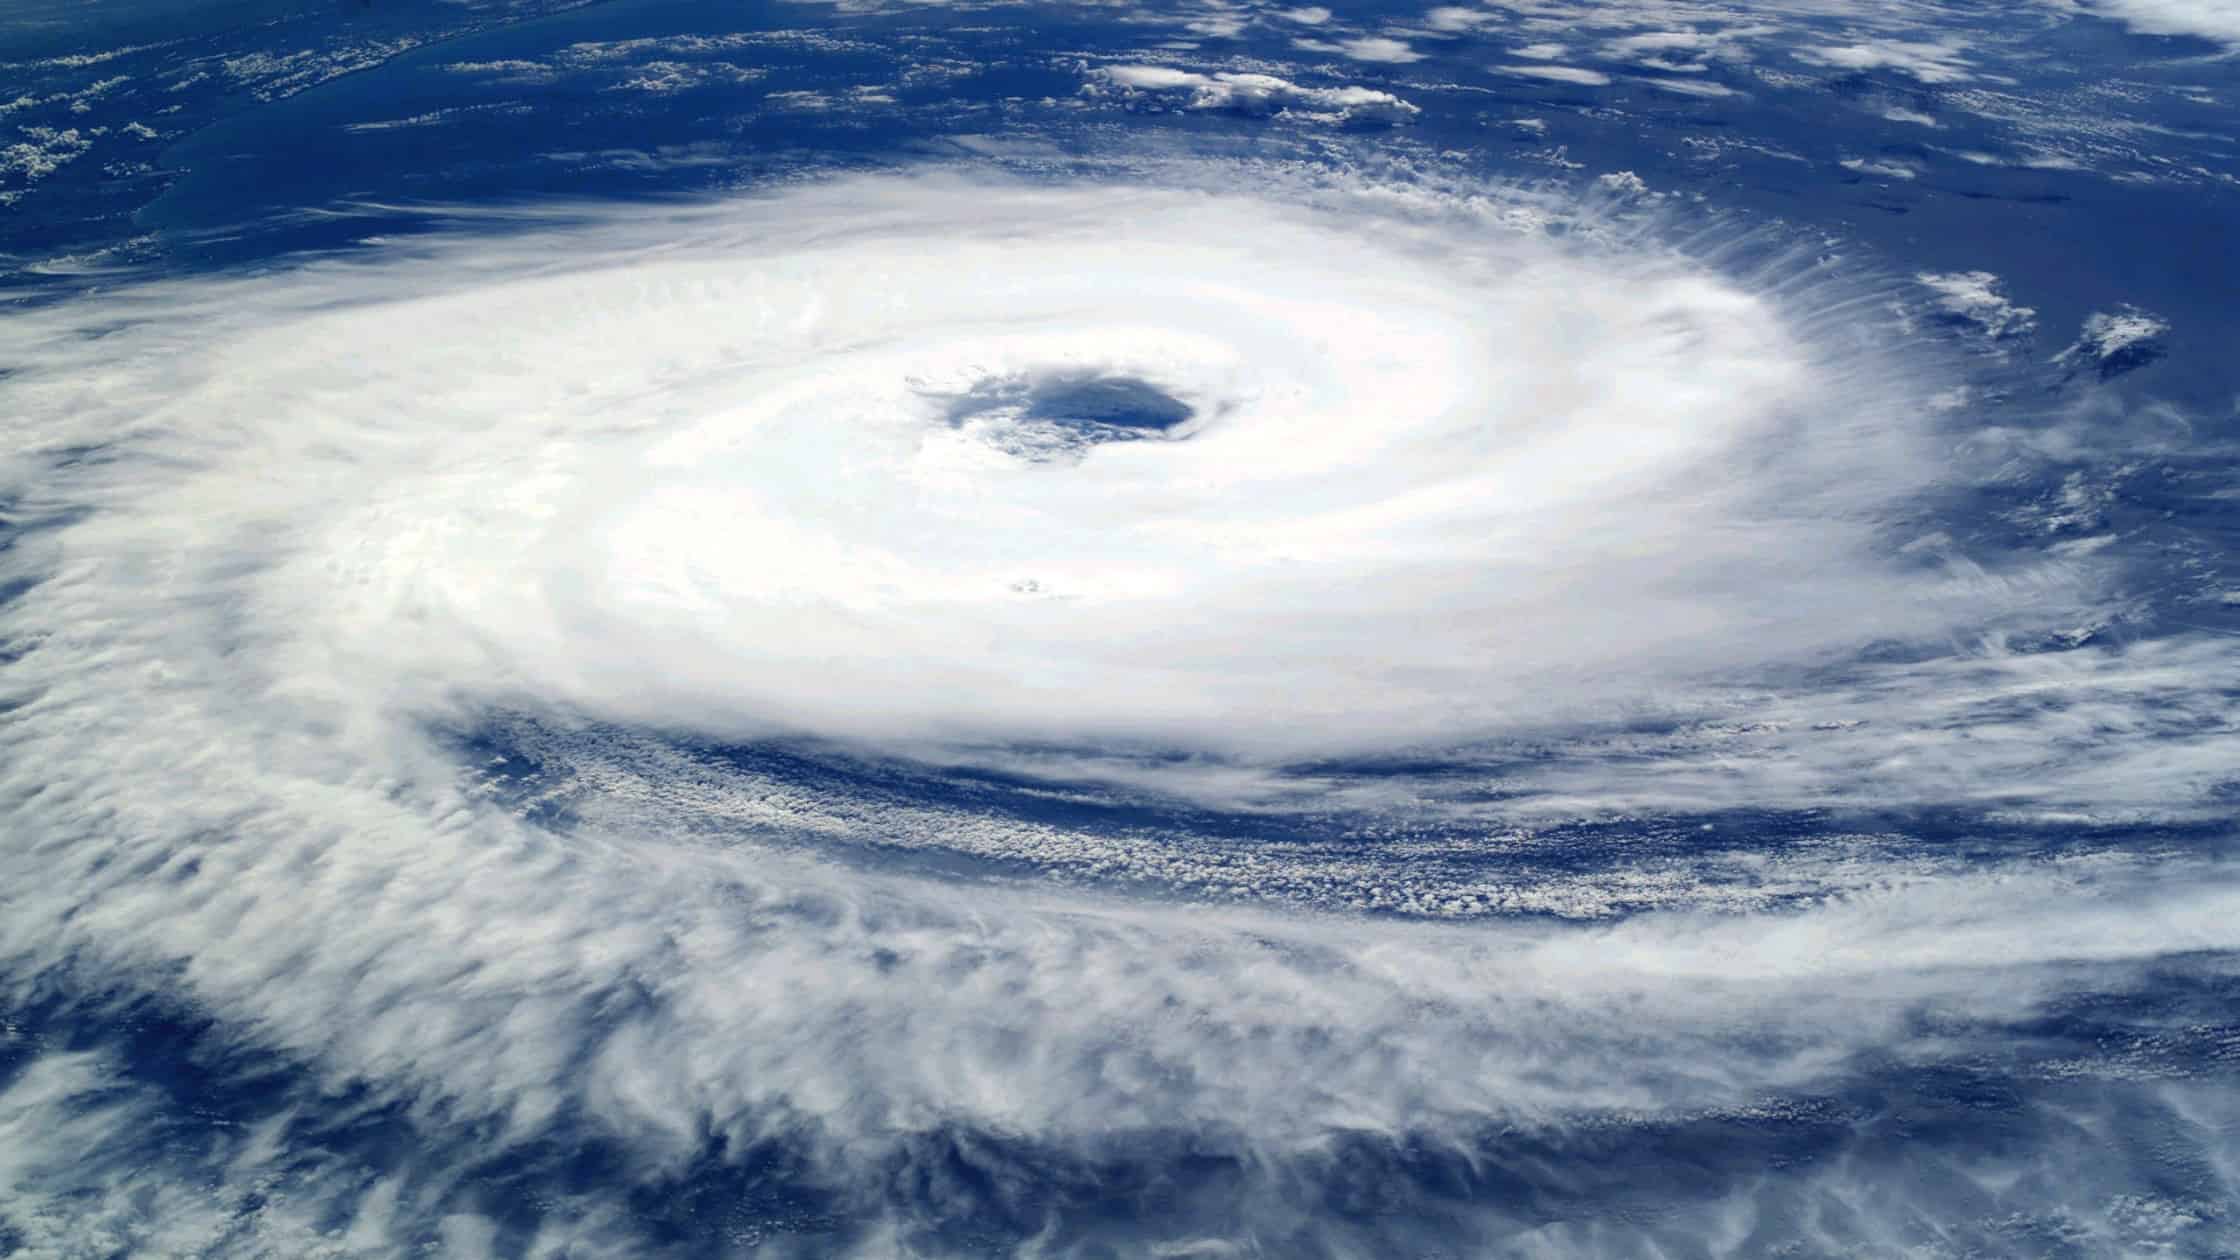 In this blog article, get resources on how to prepare for upcoming Hurricanes Lee and Margot.